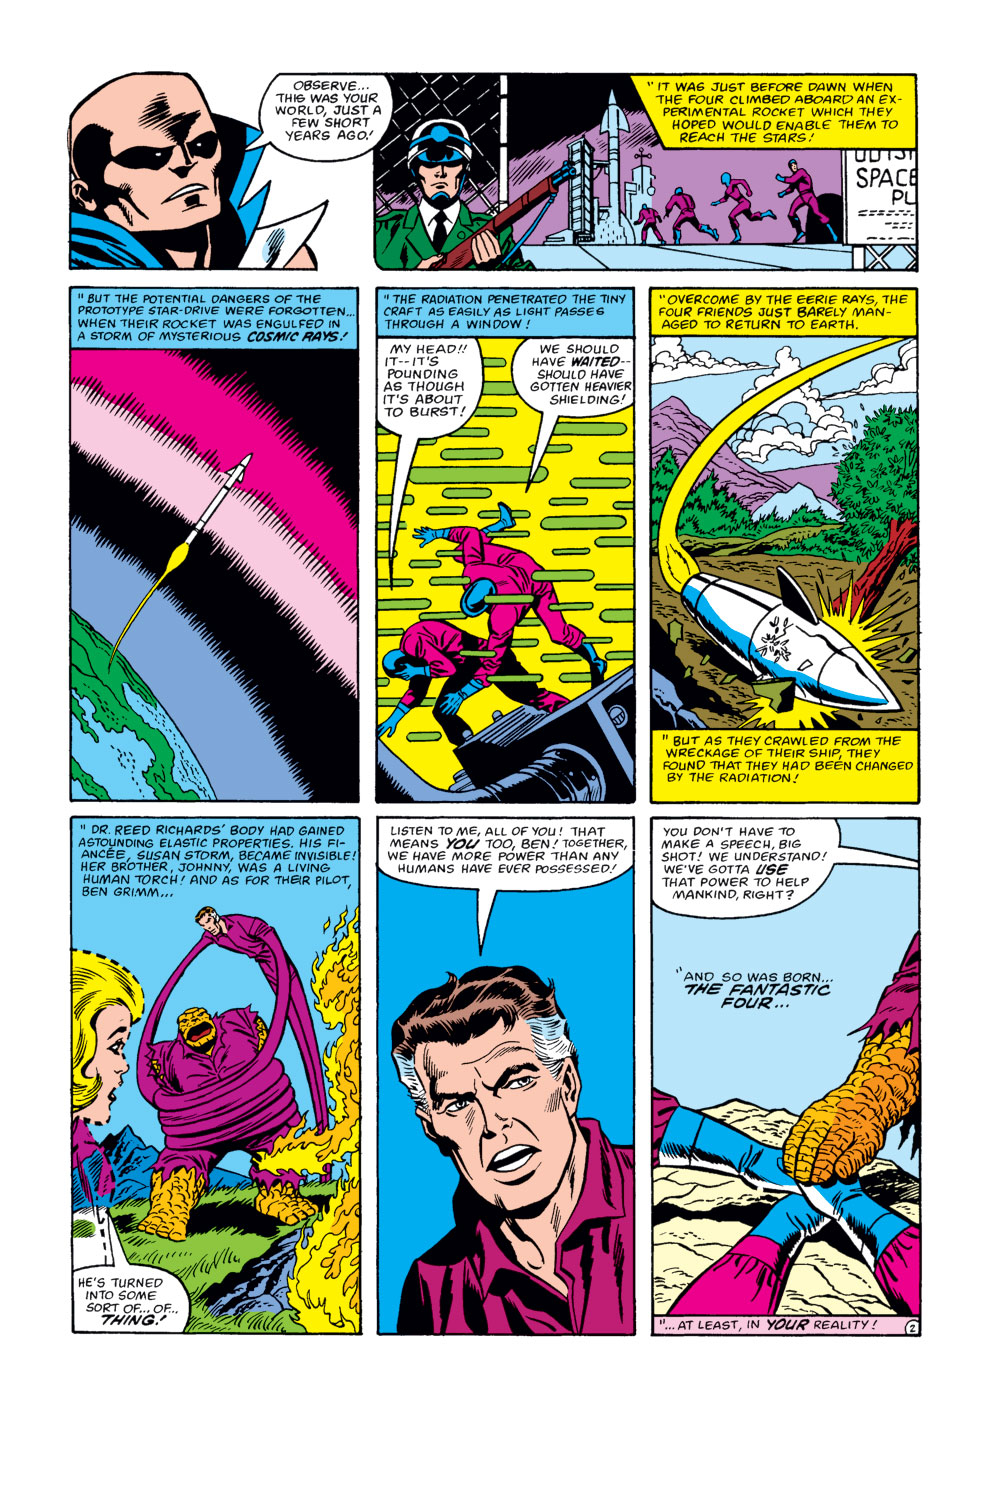 What If? (1977) issue 31 - Wolverine had killed the Hulk - Page 23